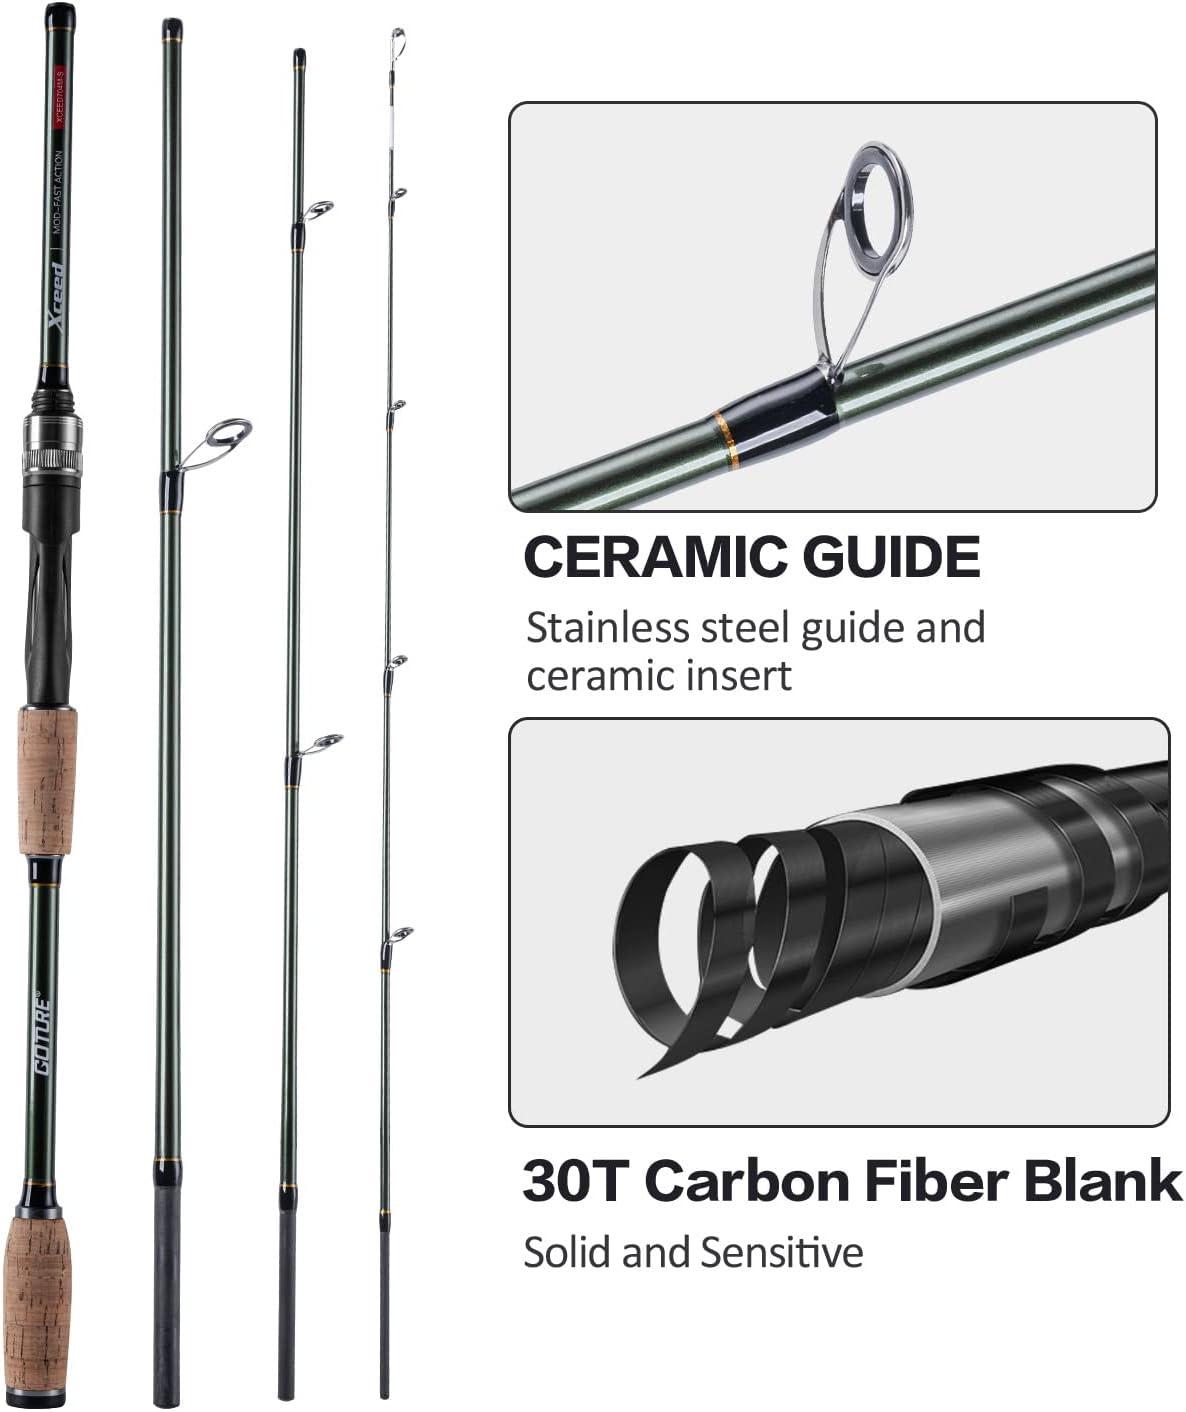 Goture Travel Fishing Rods 2 Piece/4 Piece Fishing Pole with Case